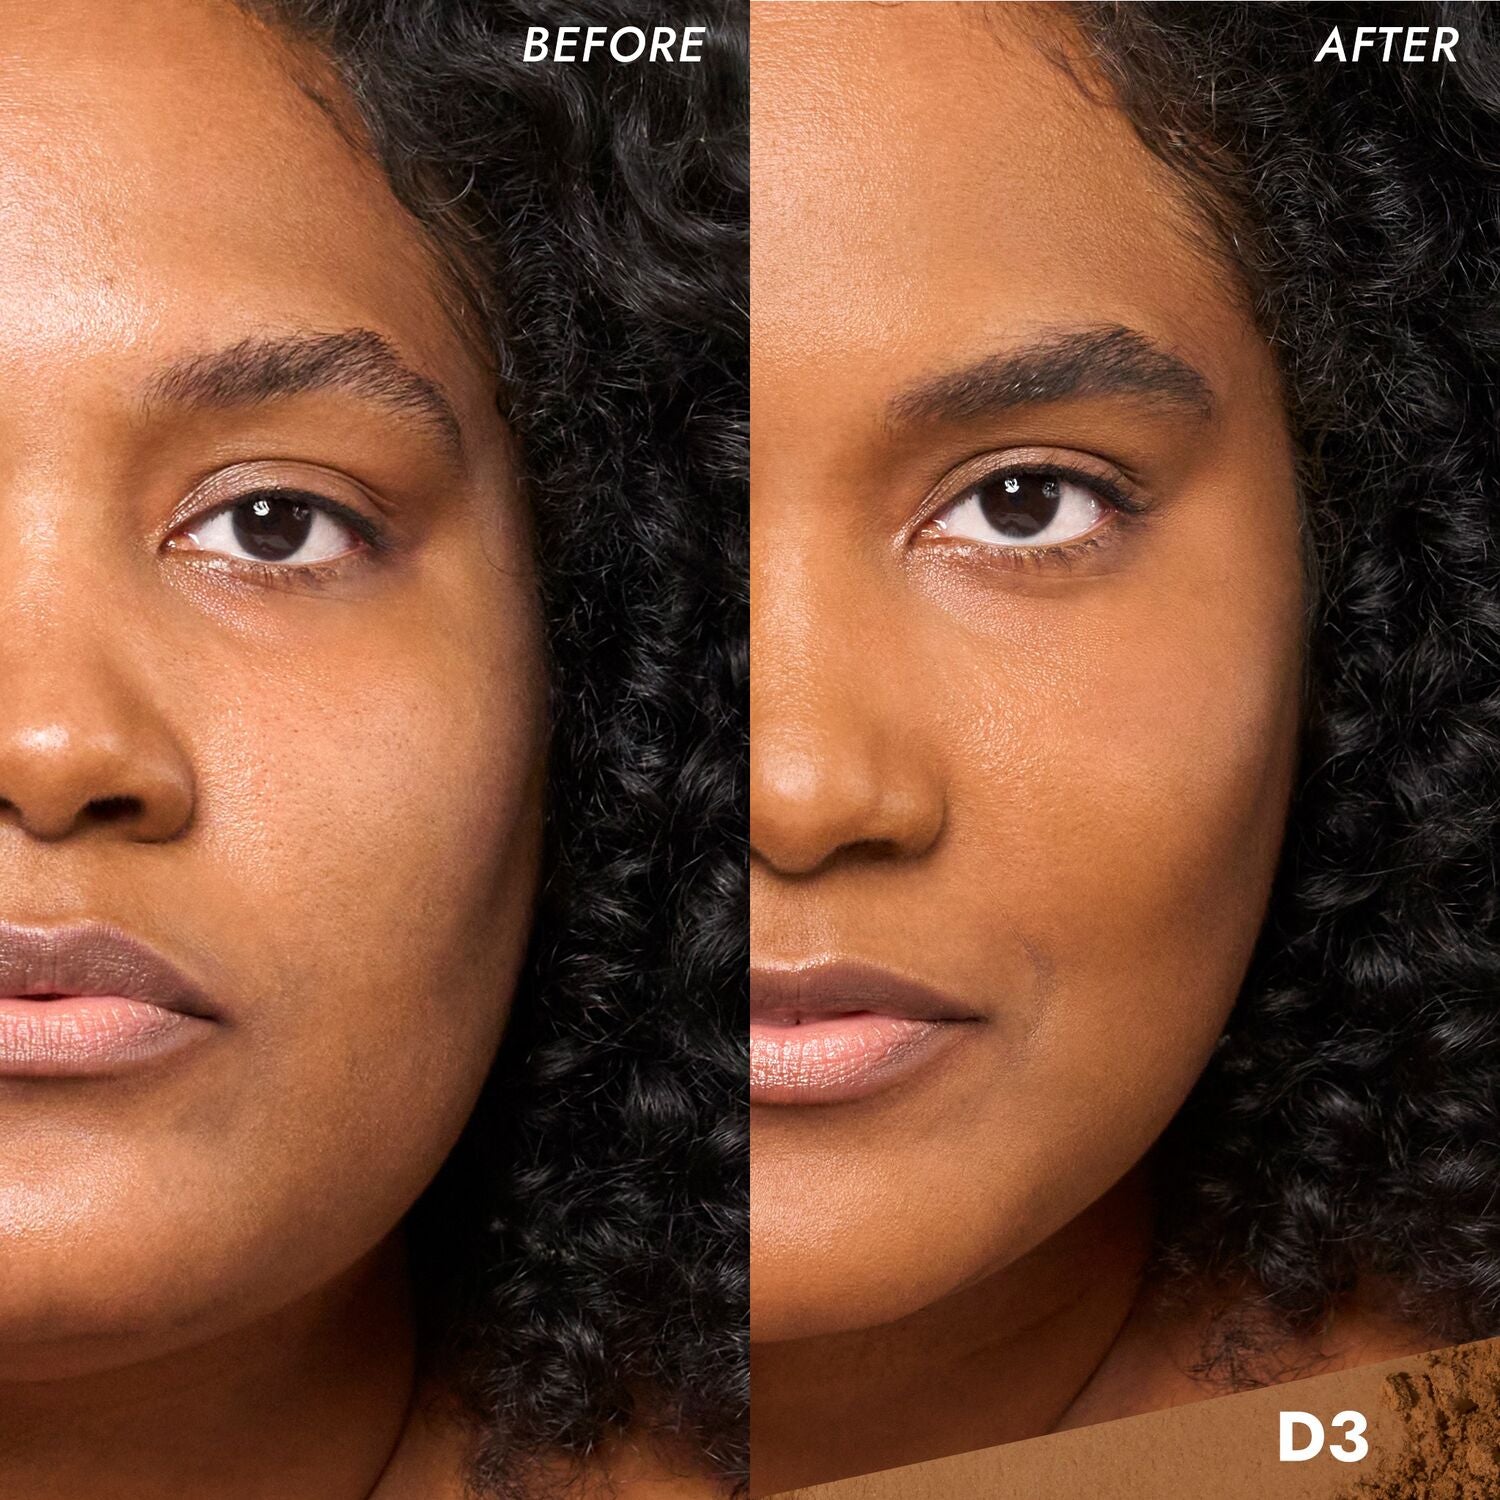 Coverfx Pressed Mineral Foundation model before and after image in shade  D3